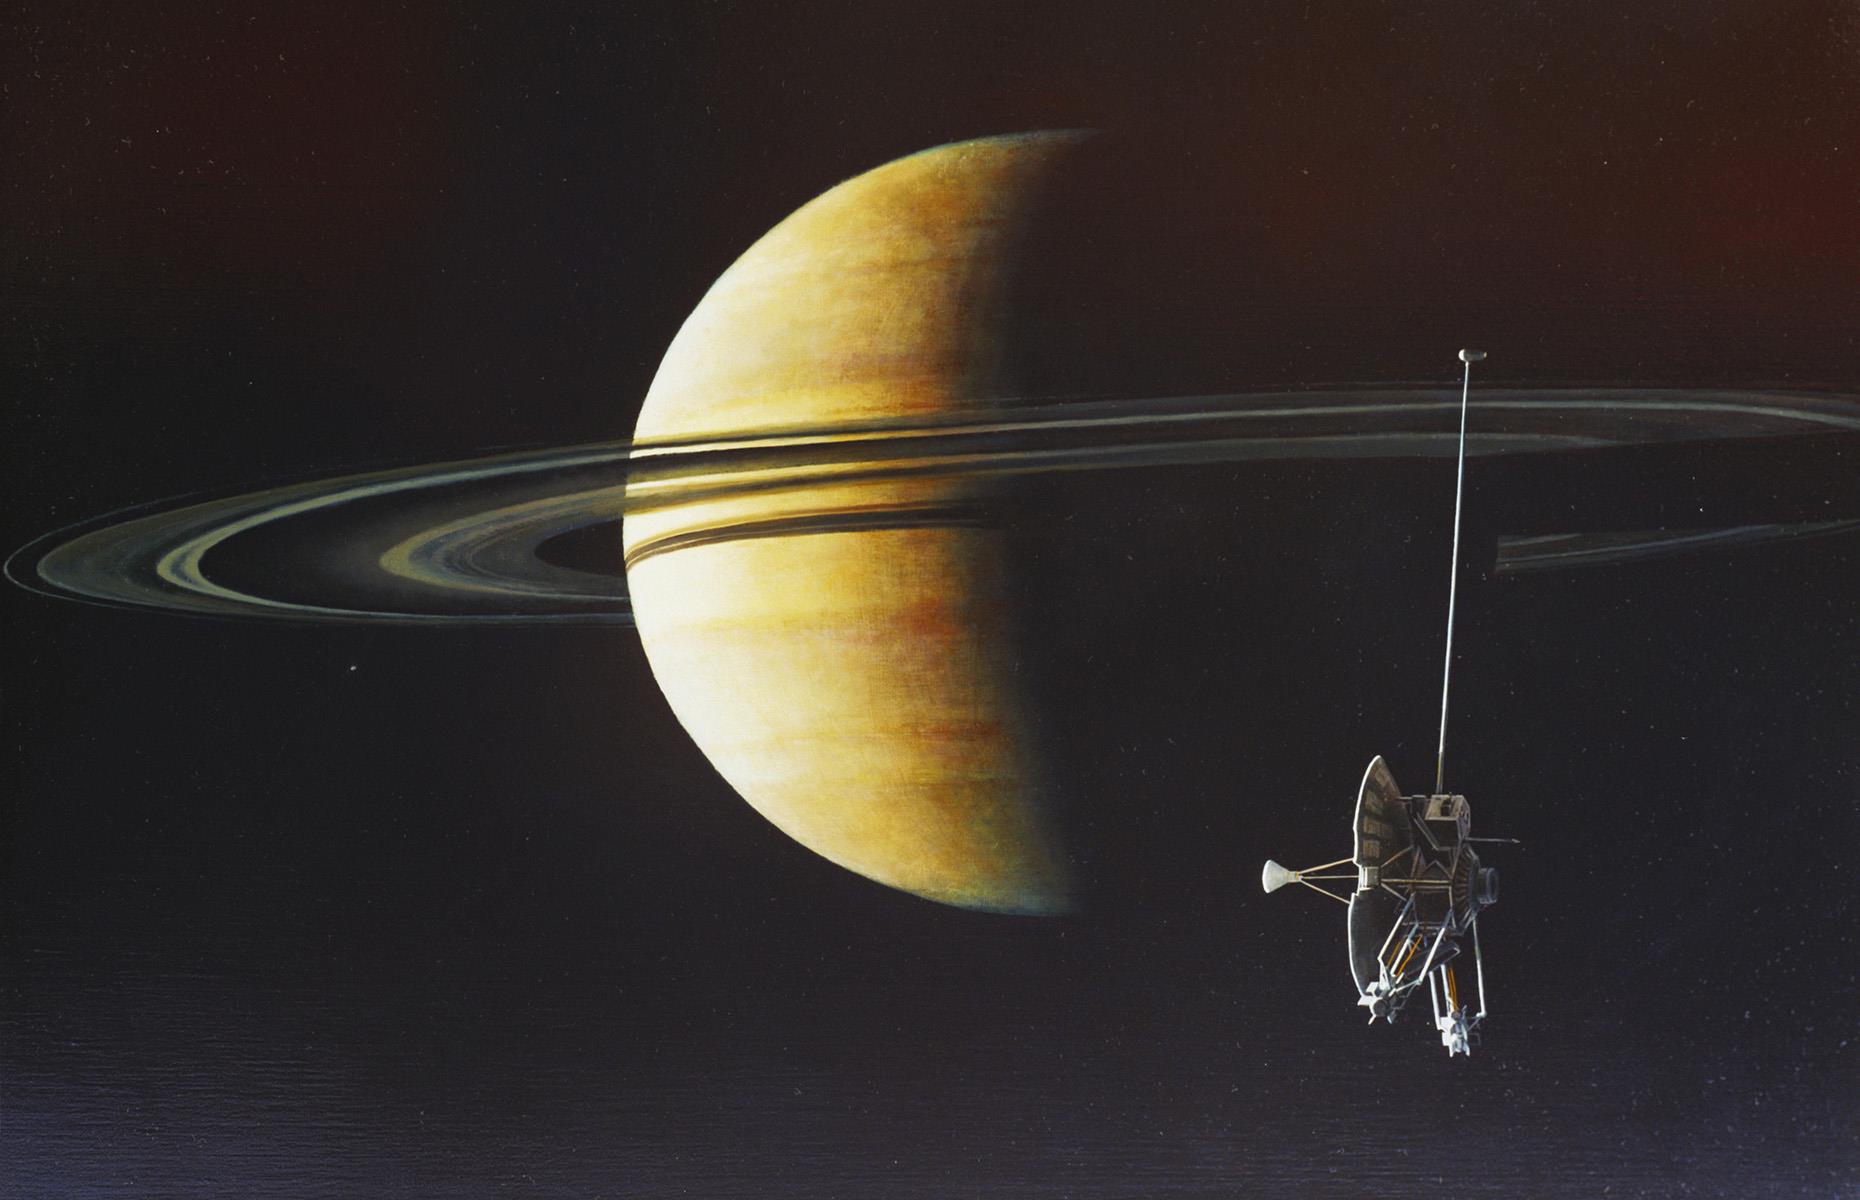 <p>Pioneer 11, the first probe to encounter Saturn and its rings, was launched on April 6, 1973. It left the solar system on February 23, 1990. The US spacecraft is currently in the Scutum constellation and should cross into interstellar space in 2027.</p>